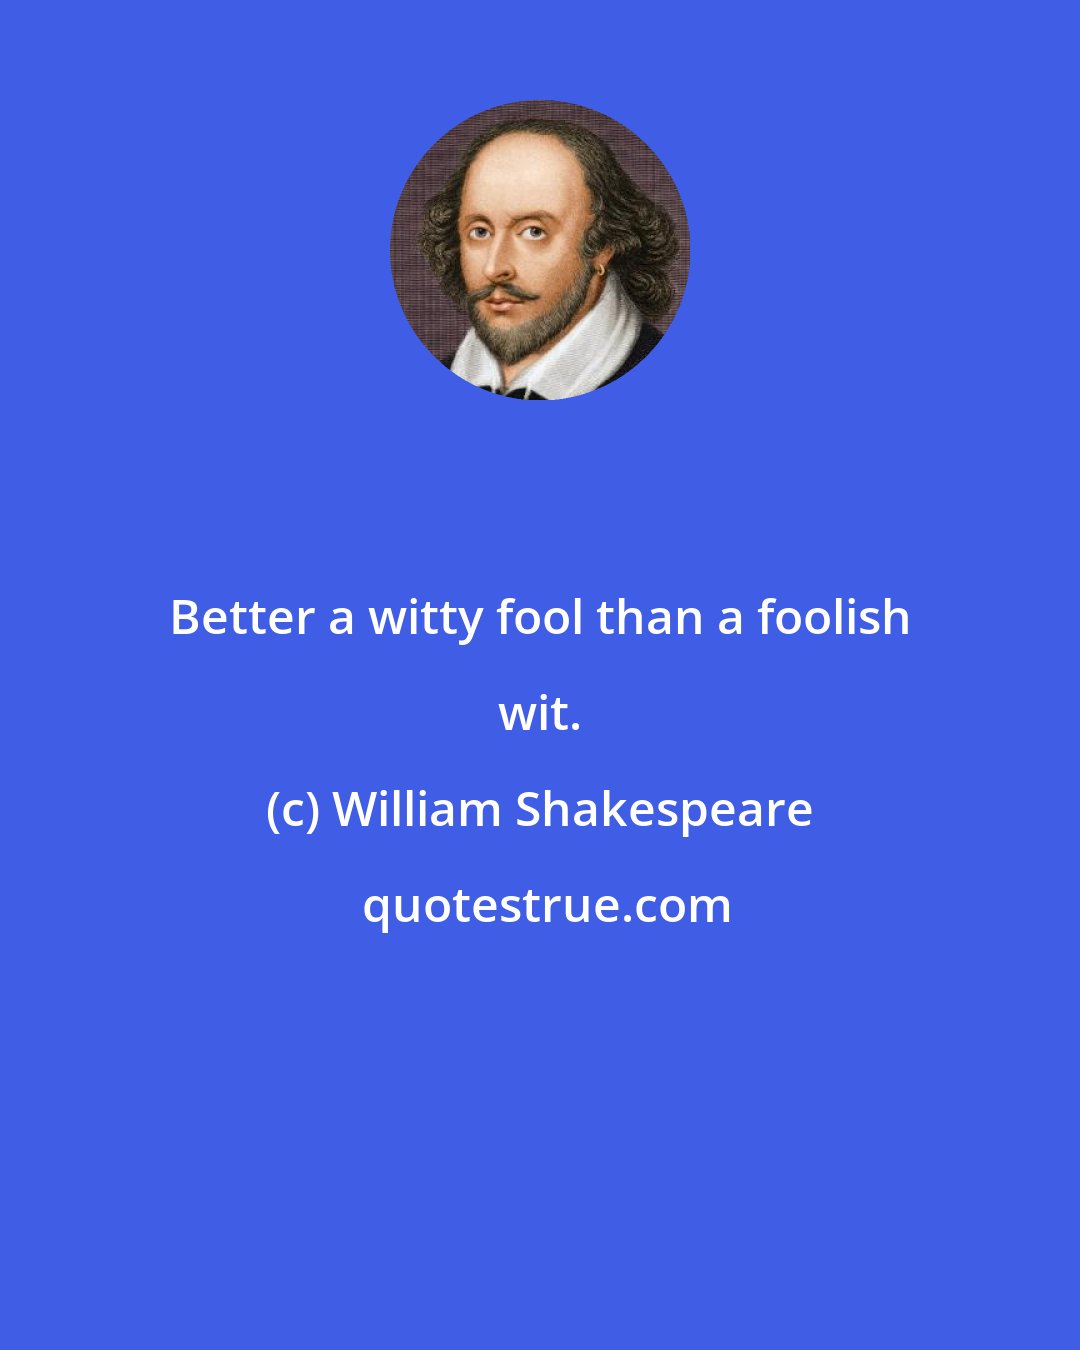 William Shakespeare: Better a witty fool than a foolish wit.